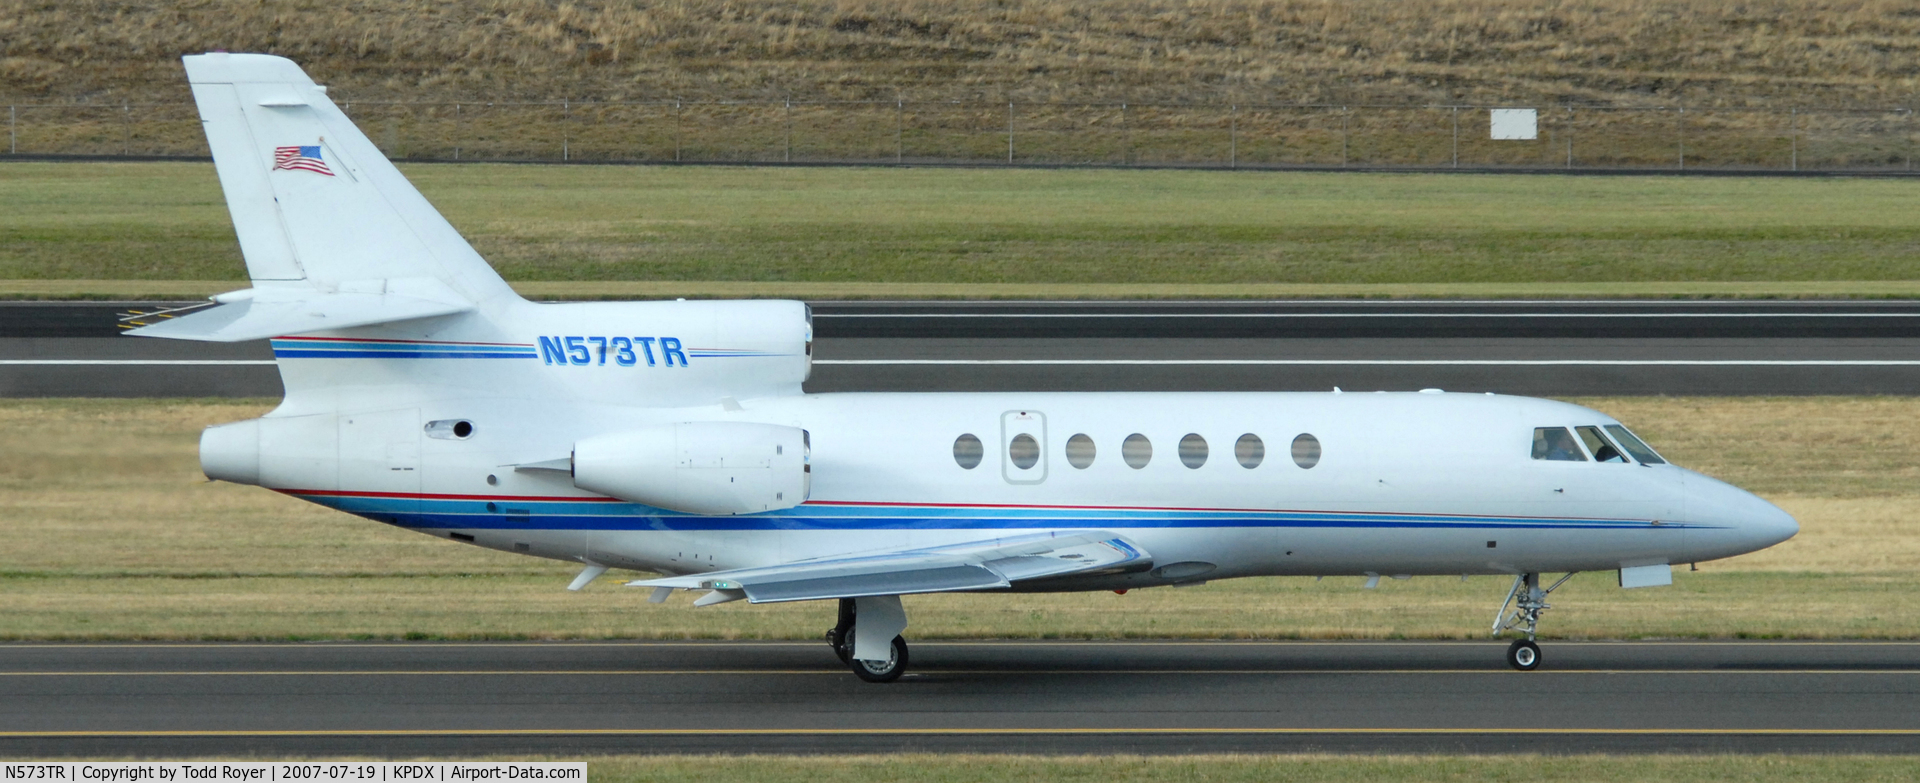 N573TR, Dassault Falcon 50 C/N 217, Taxi for departure